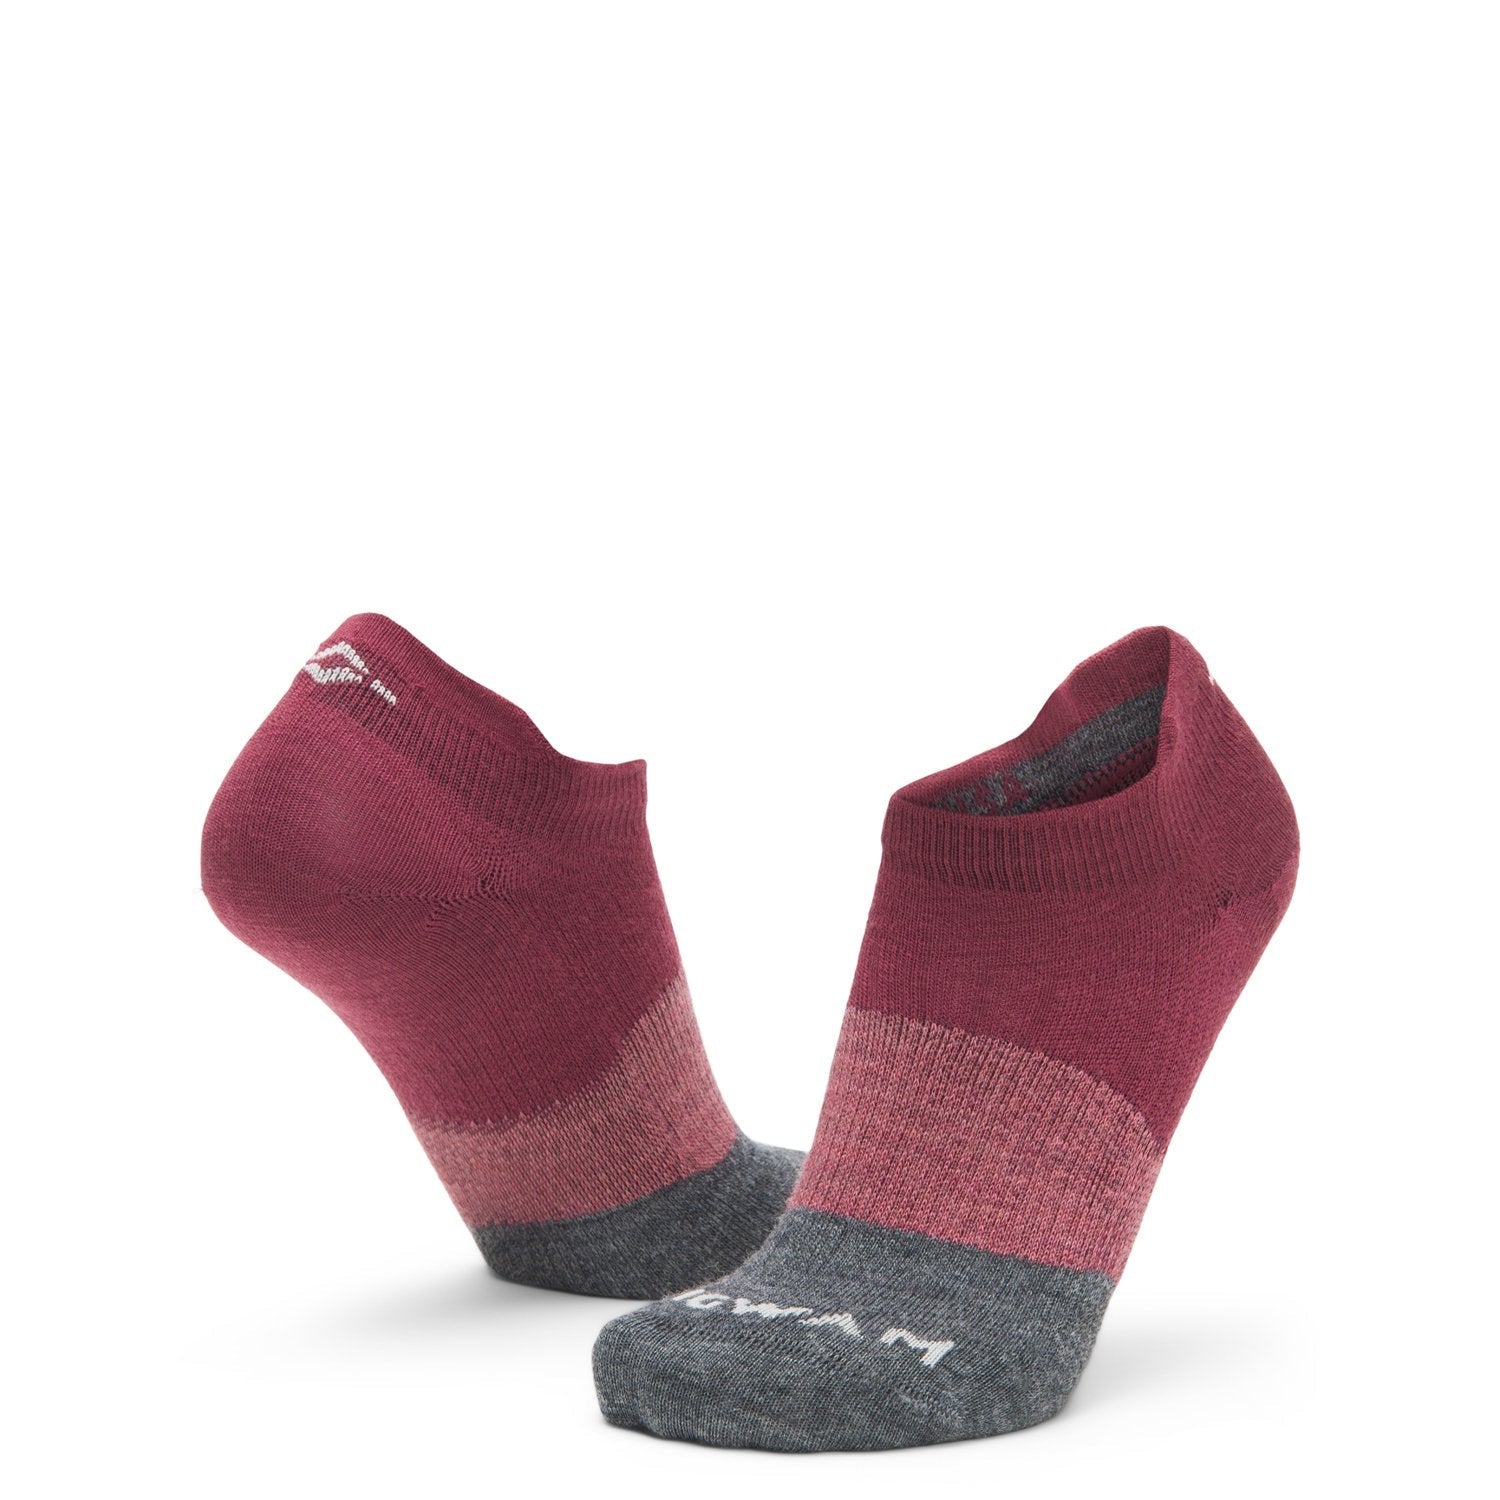 Trail Junkie Ultralight Low Sock With Merino Wool - Rhododendron full product perspective - made in The USA Wigwam Socks